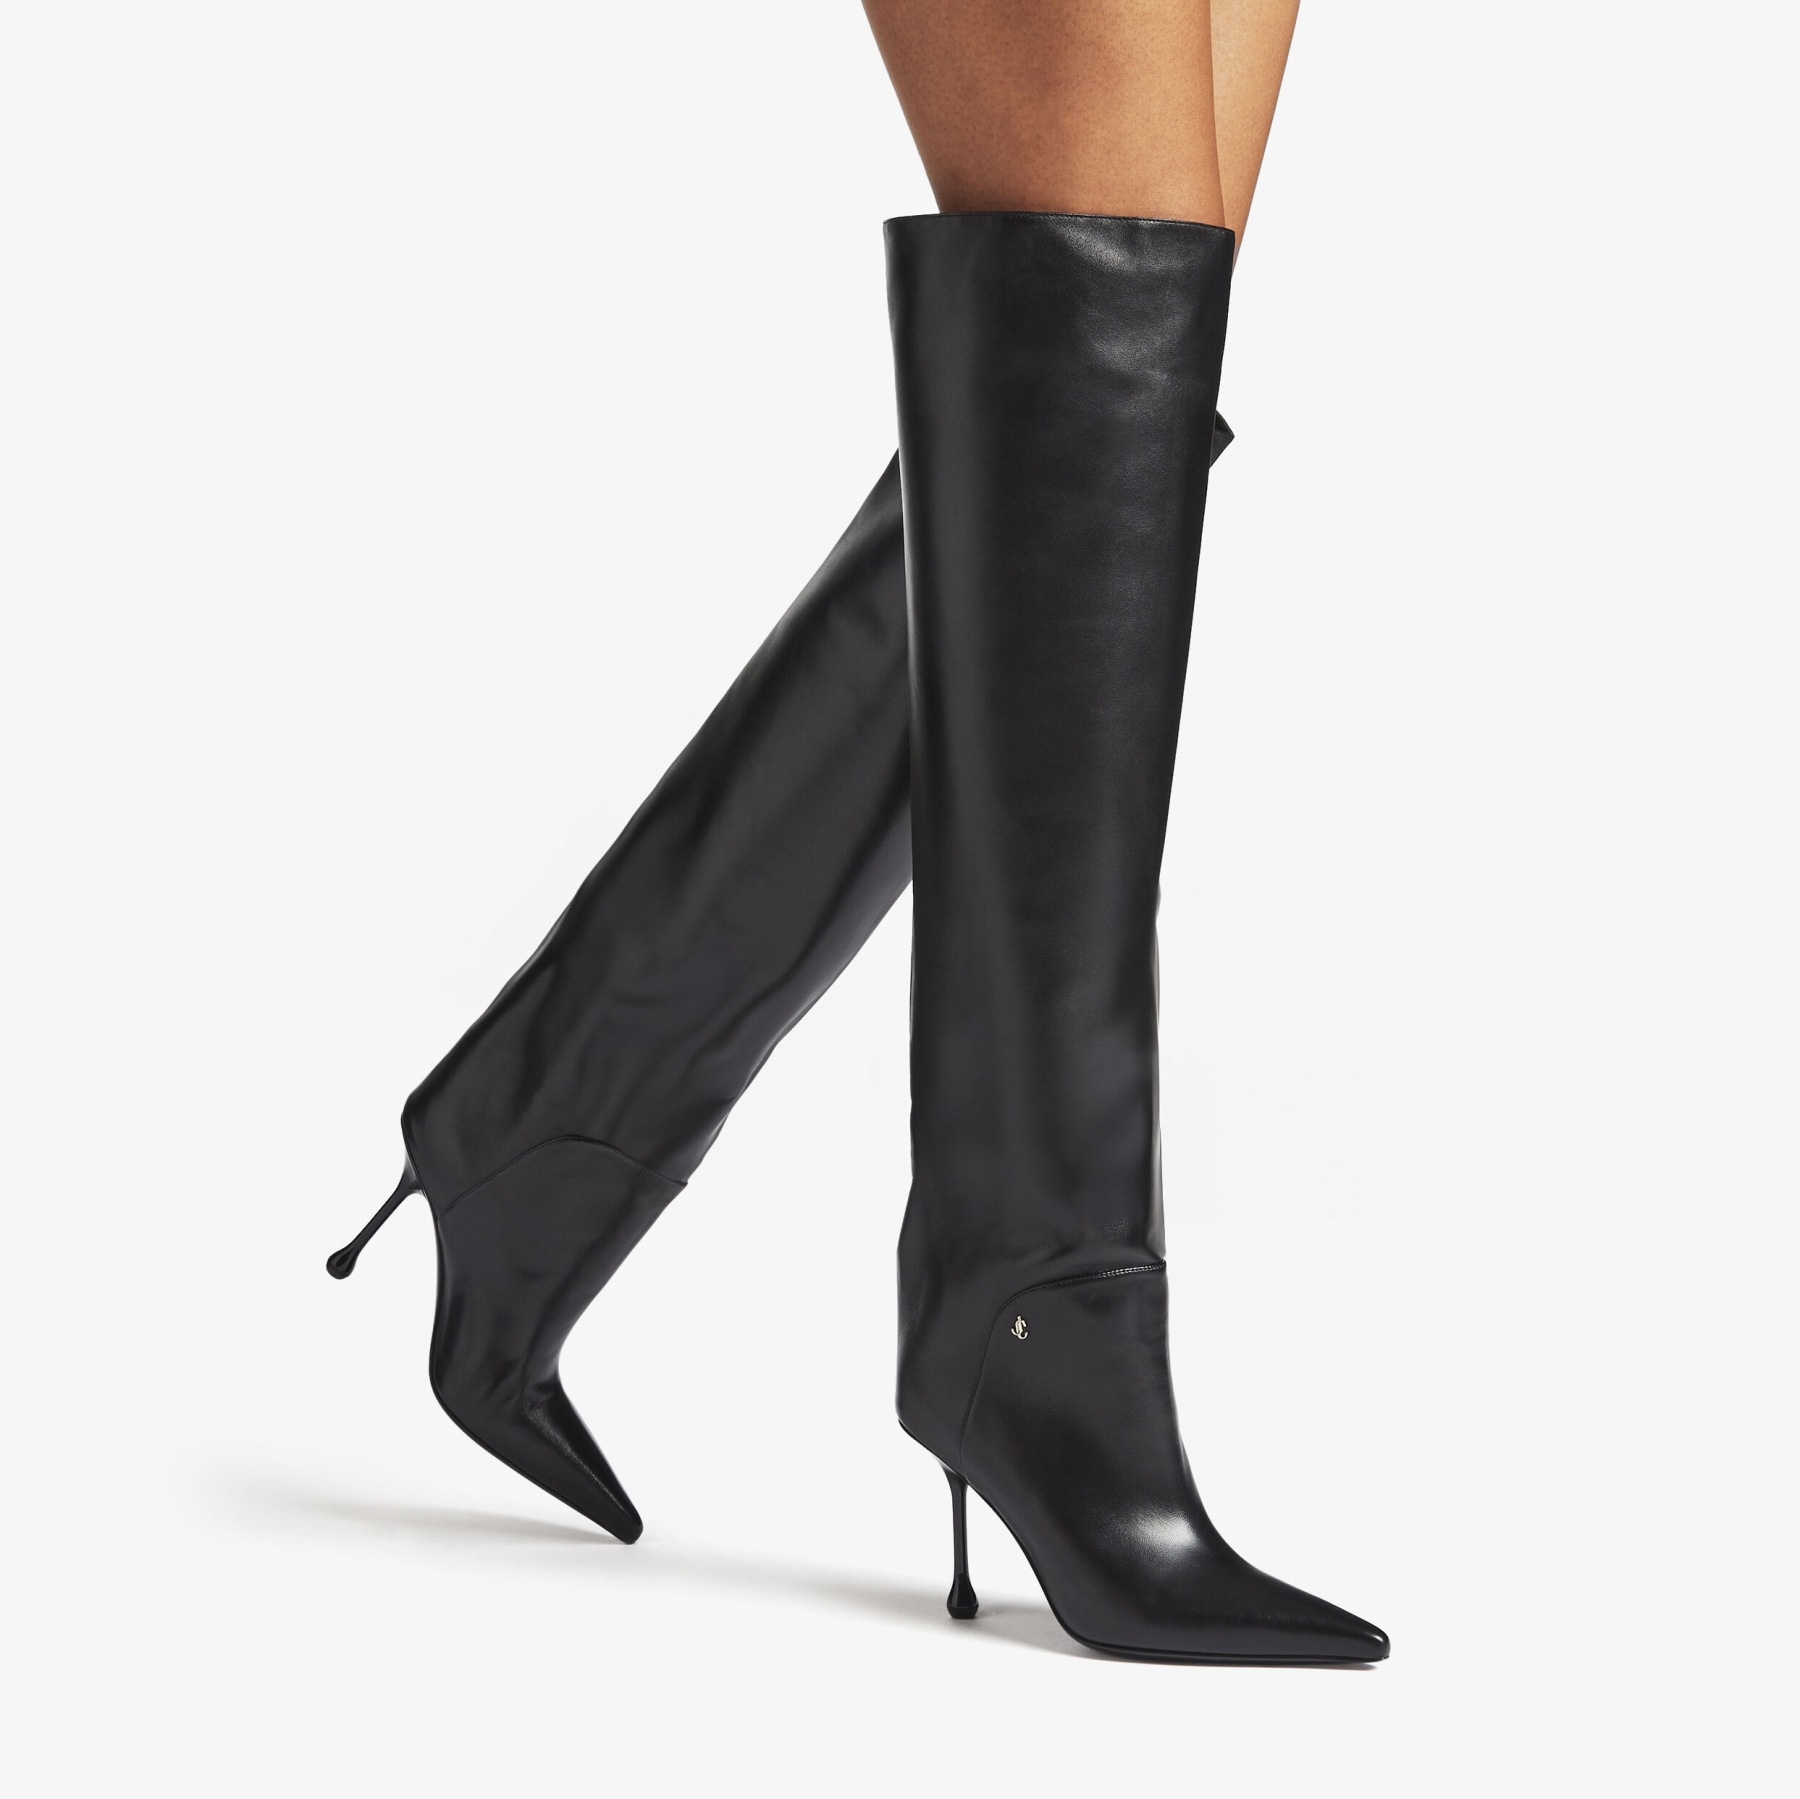 Cycas Knee Boot 95
Black Nappa Leather Knee-High Boots - 2